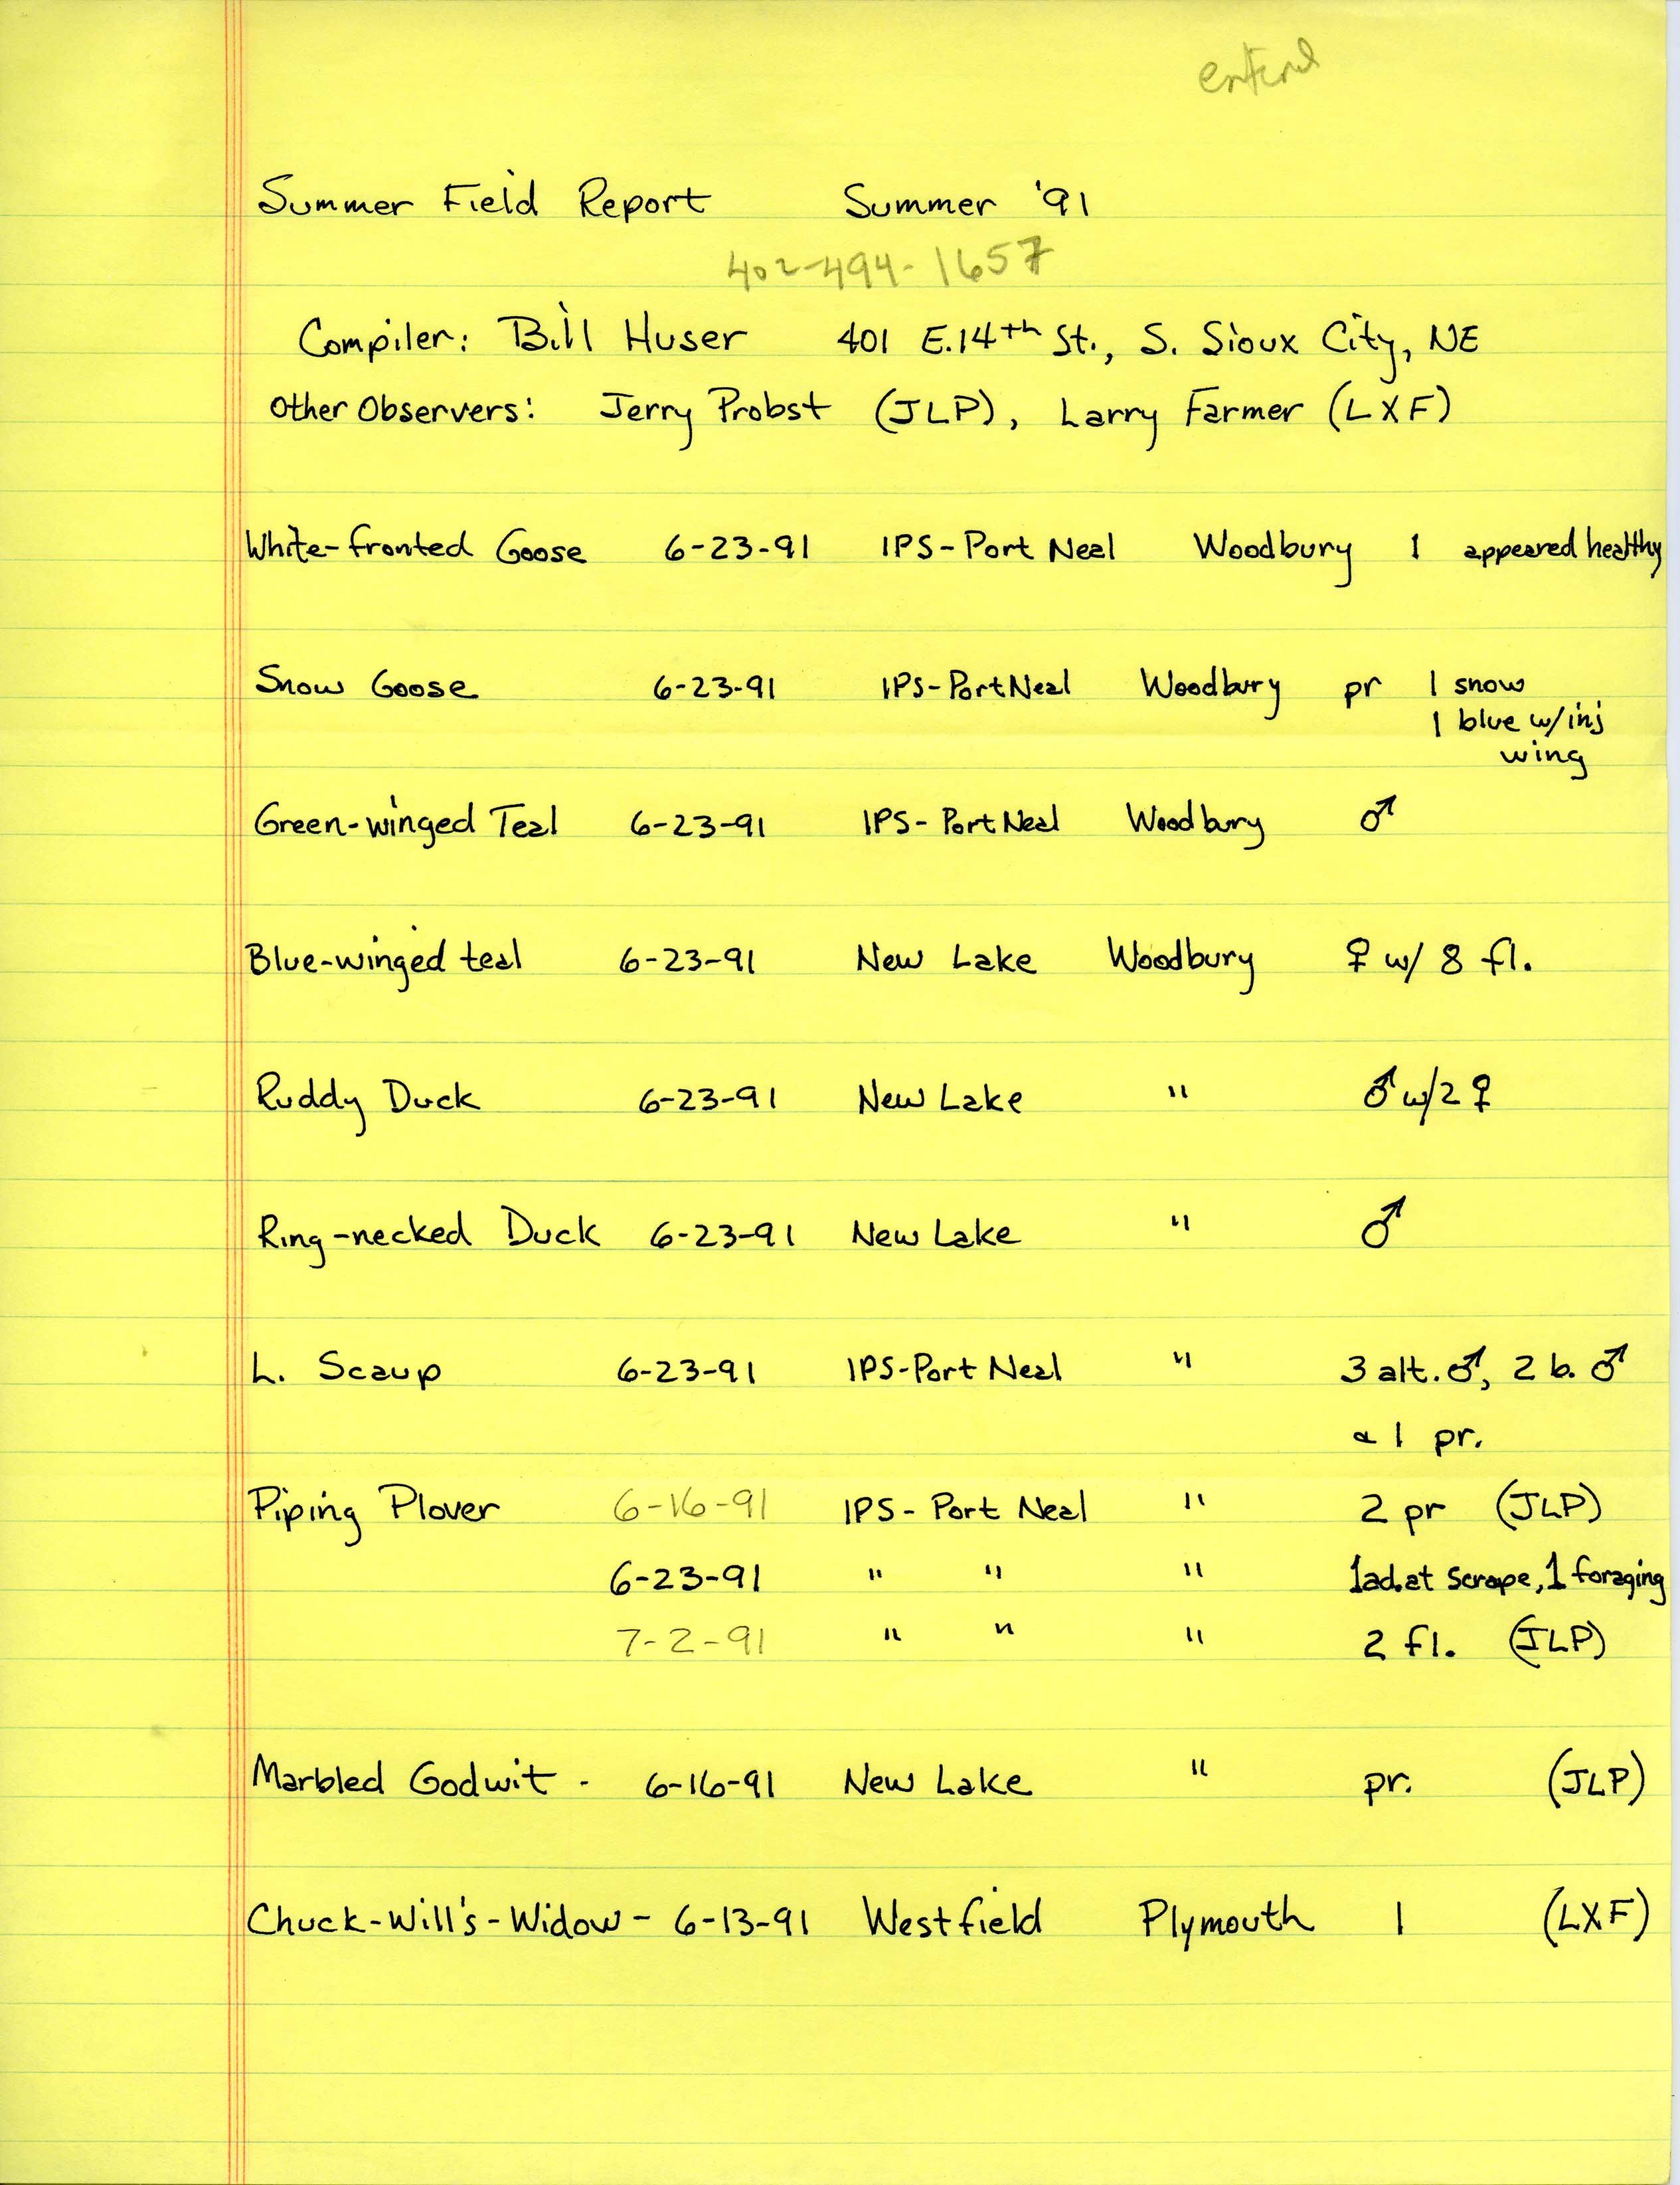 Field notes contributed by Bill F. Huser, summer 1991